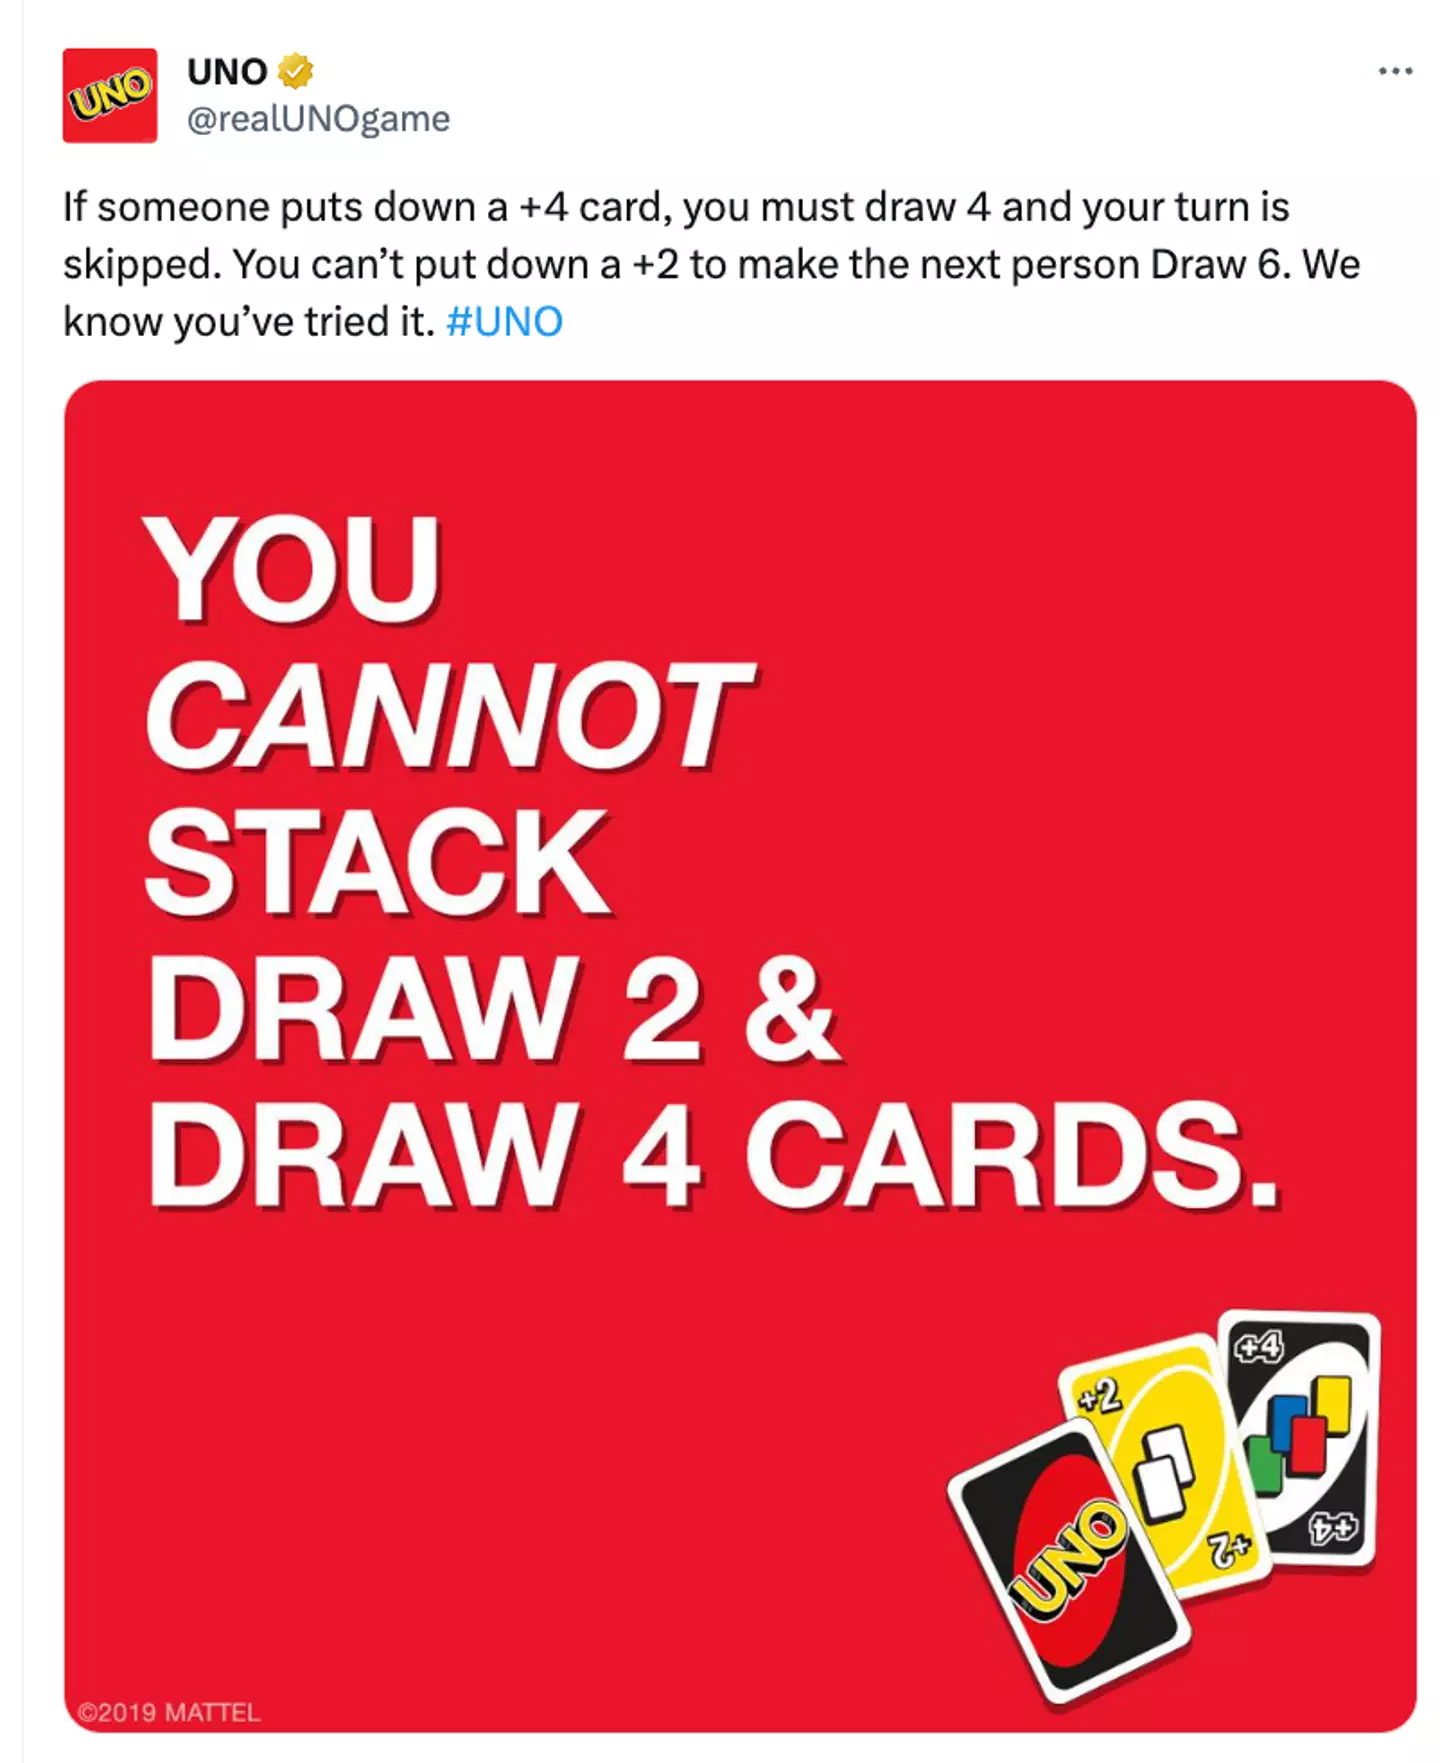 UNO has cleared up the rules of the popular card game.